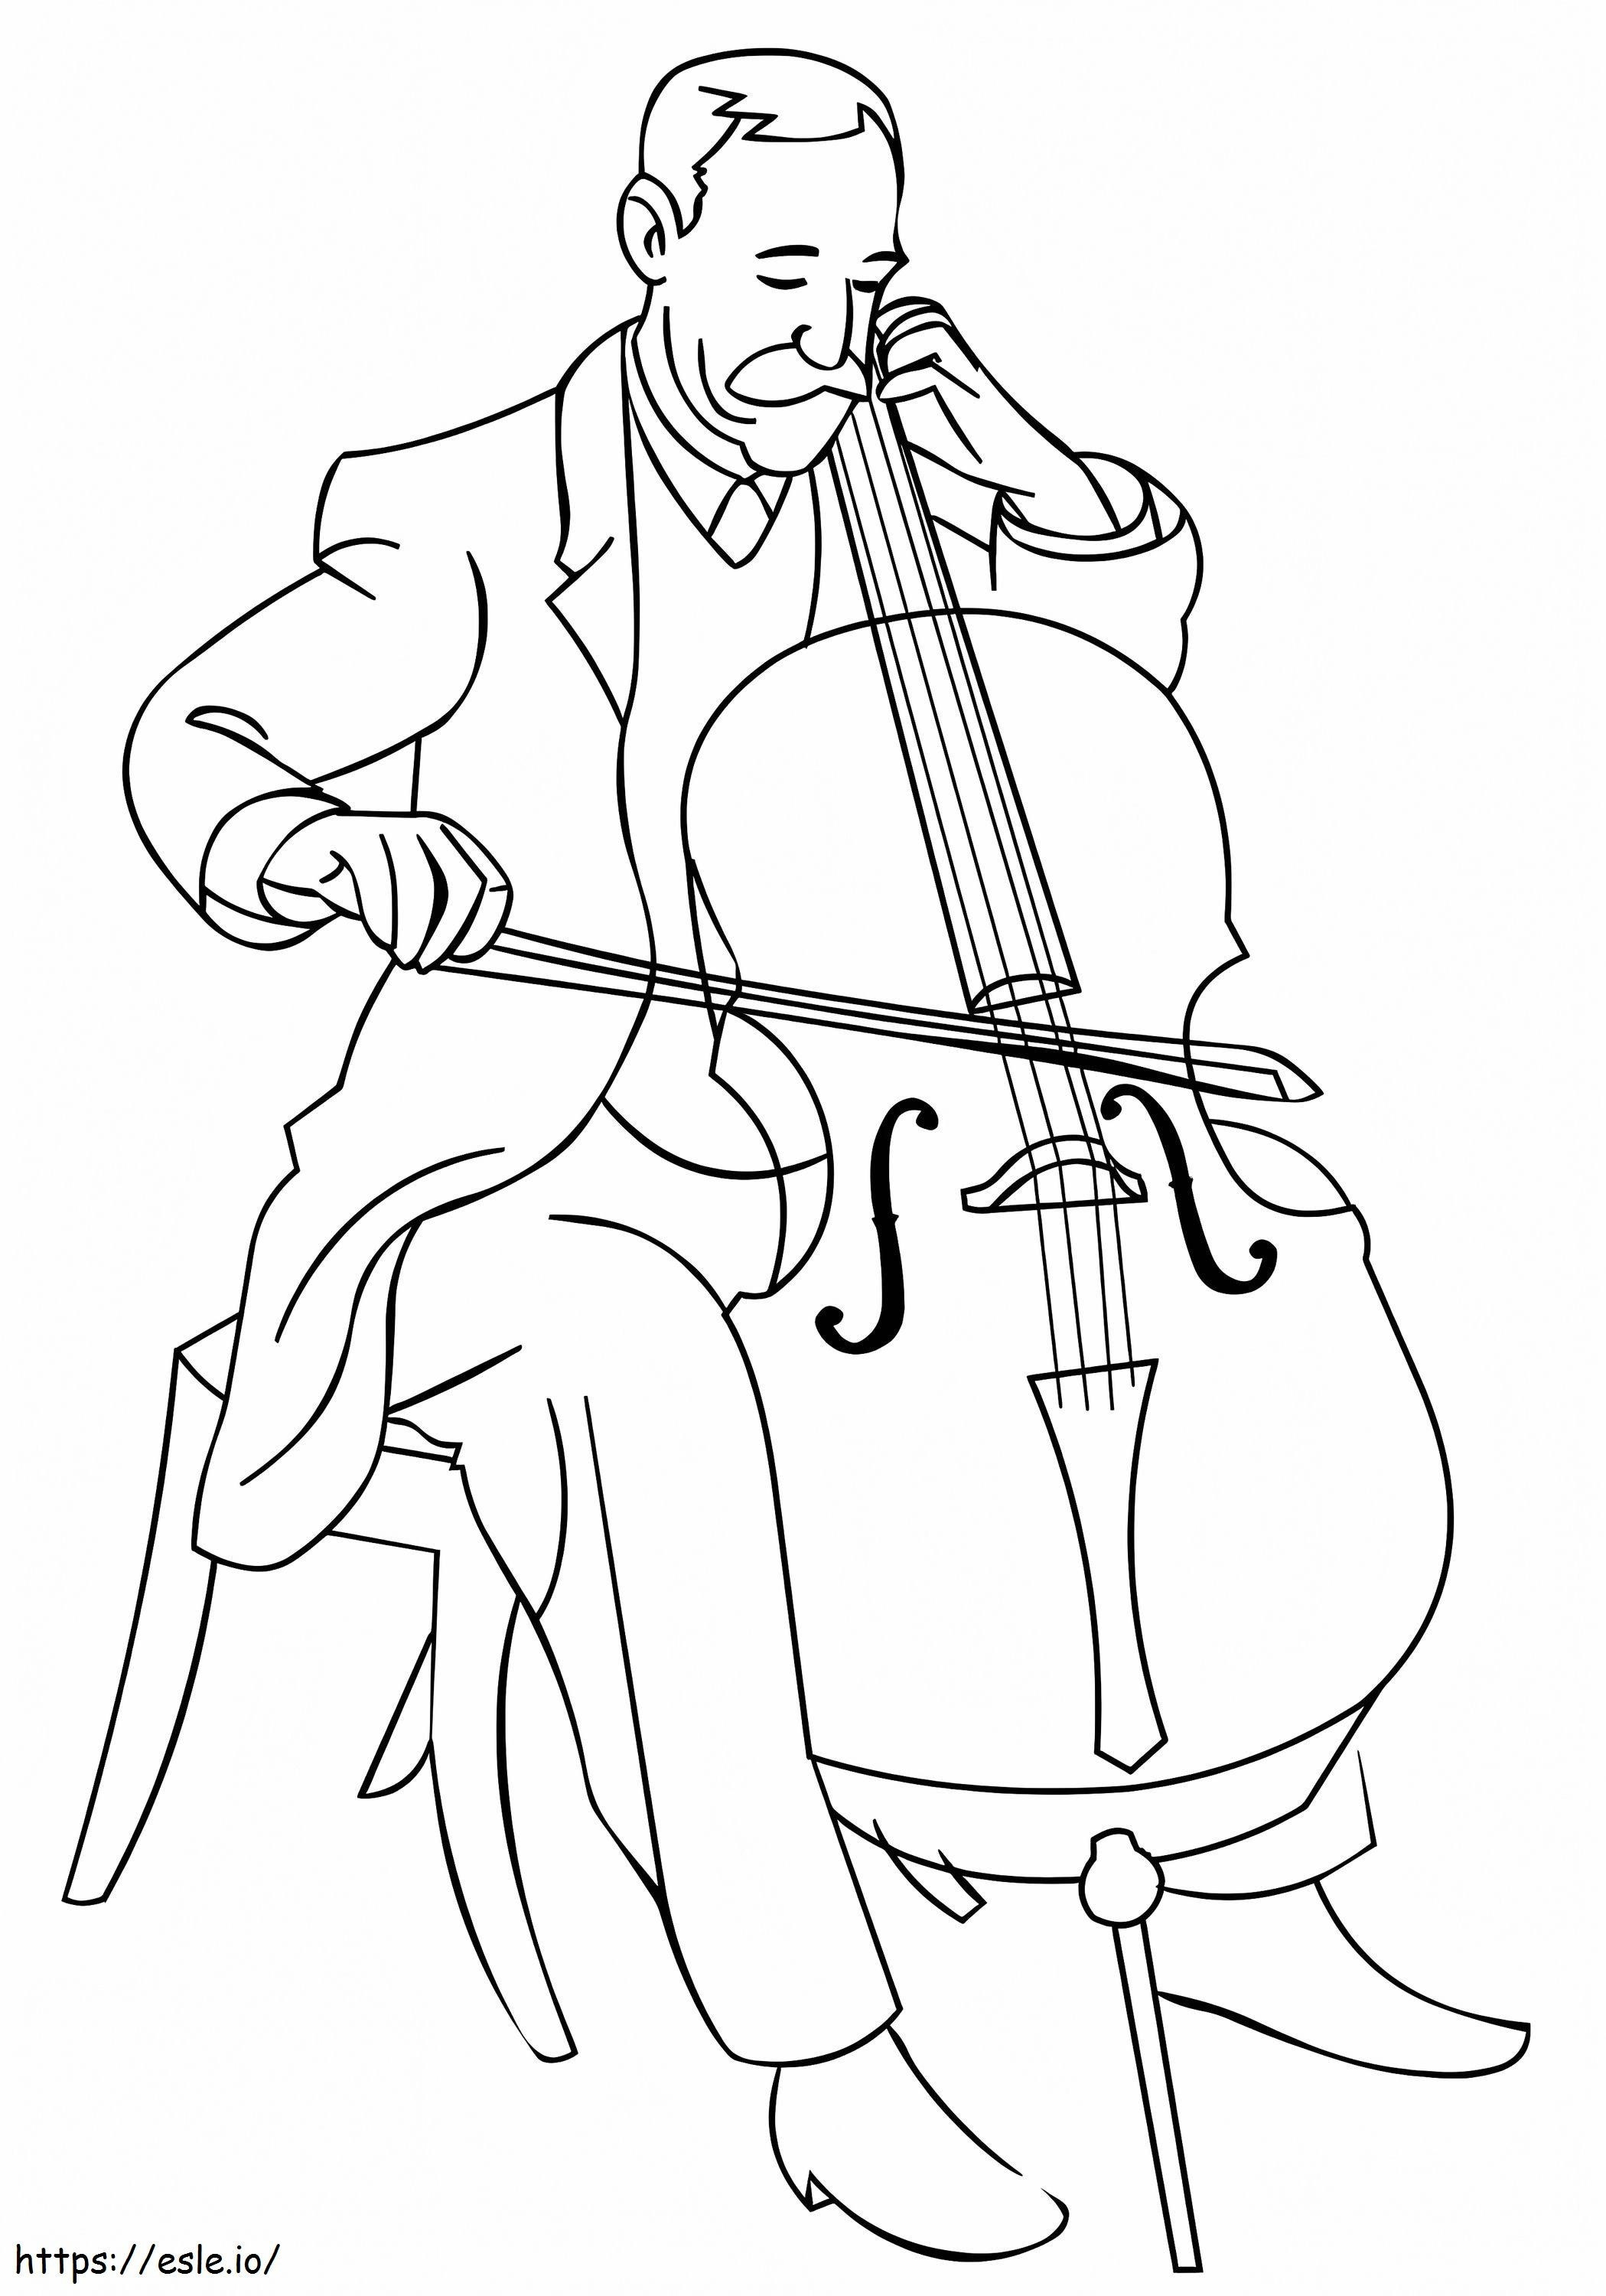 Cello Player coloring page